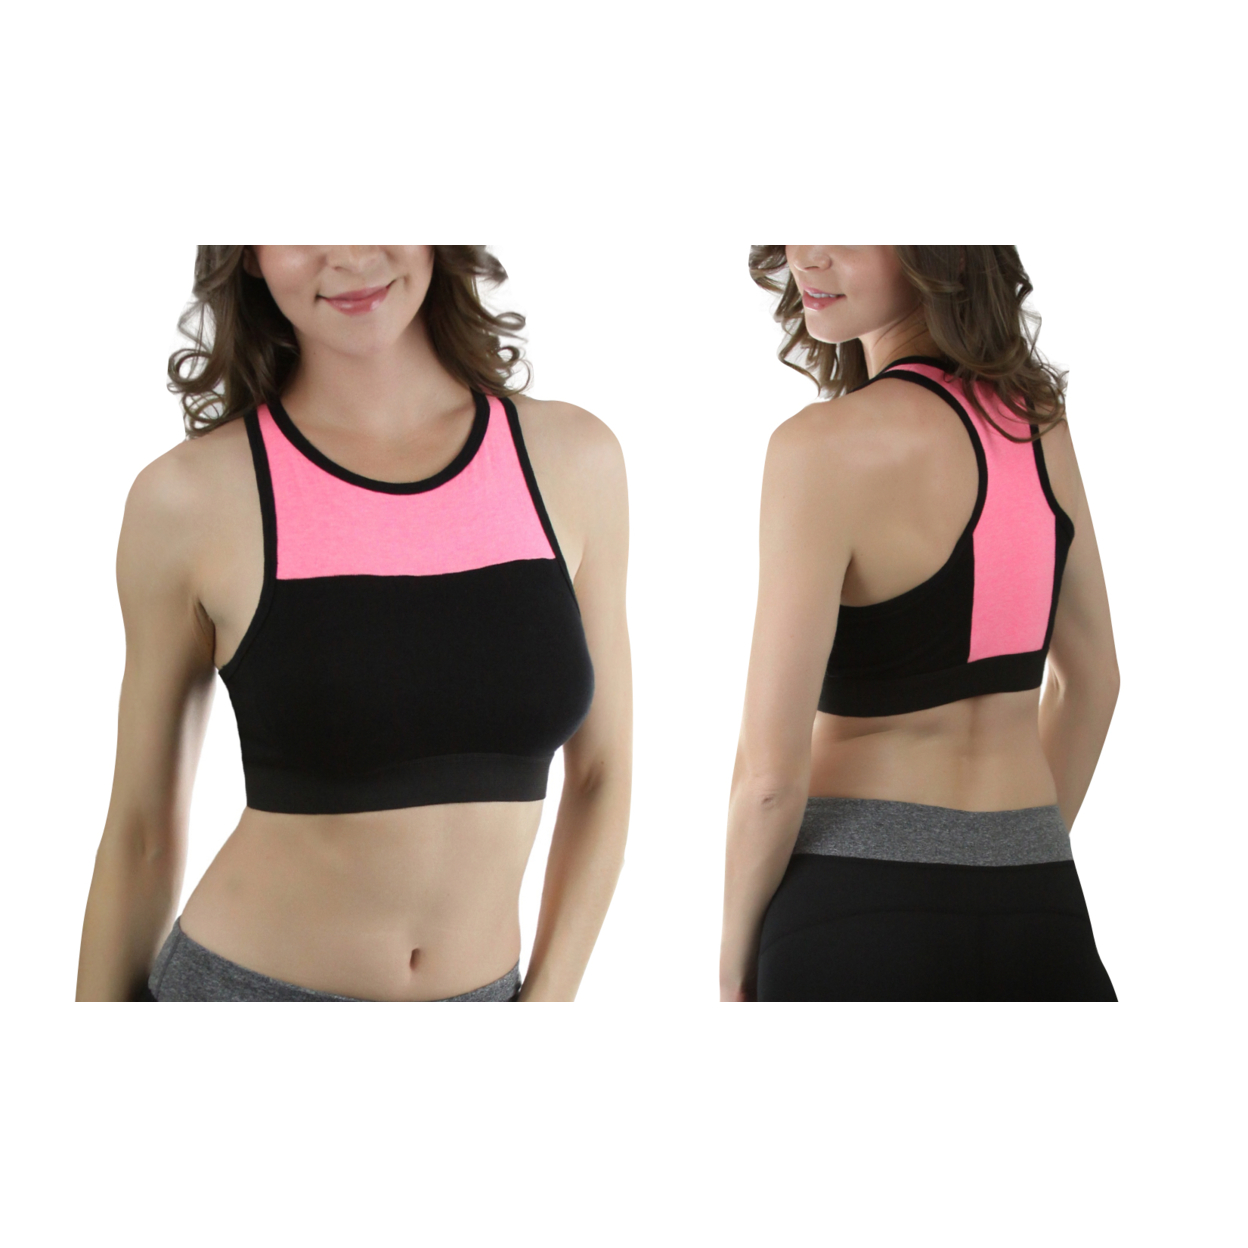 Single Or 2-Pack Of Women's Color-Block Two Tone Cotton-Blend Bra - Black/Neon Pink, Large